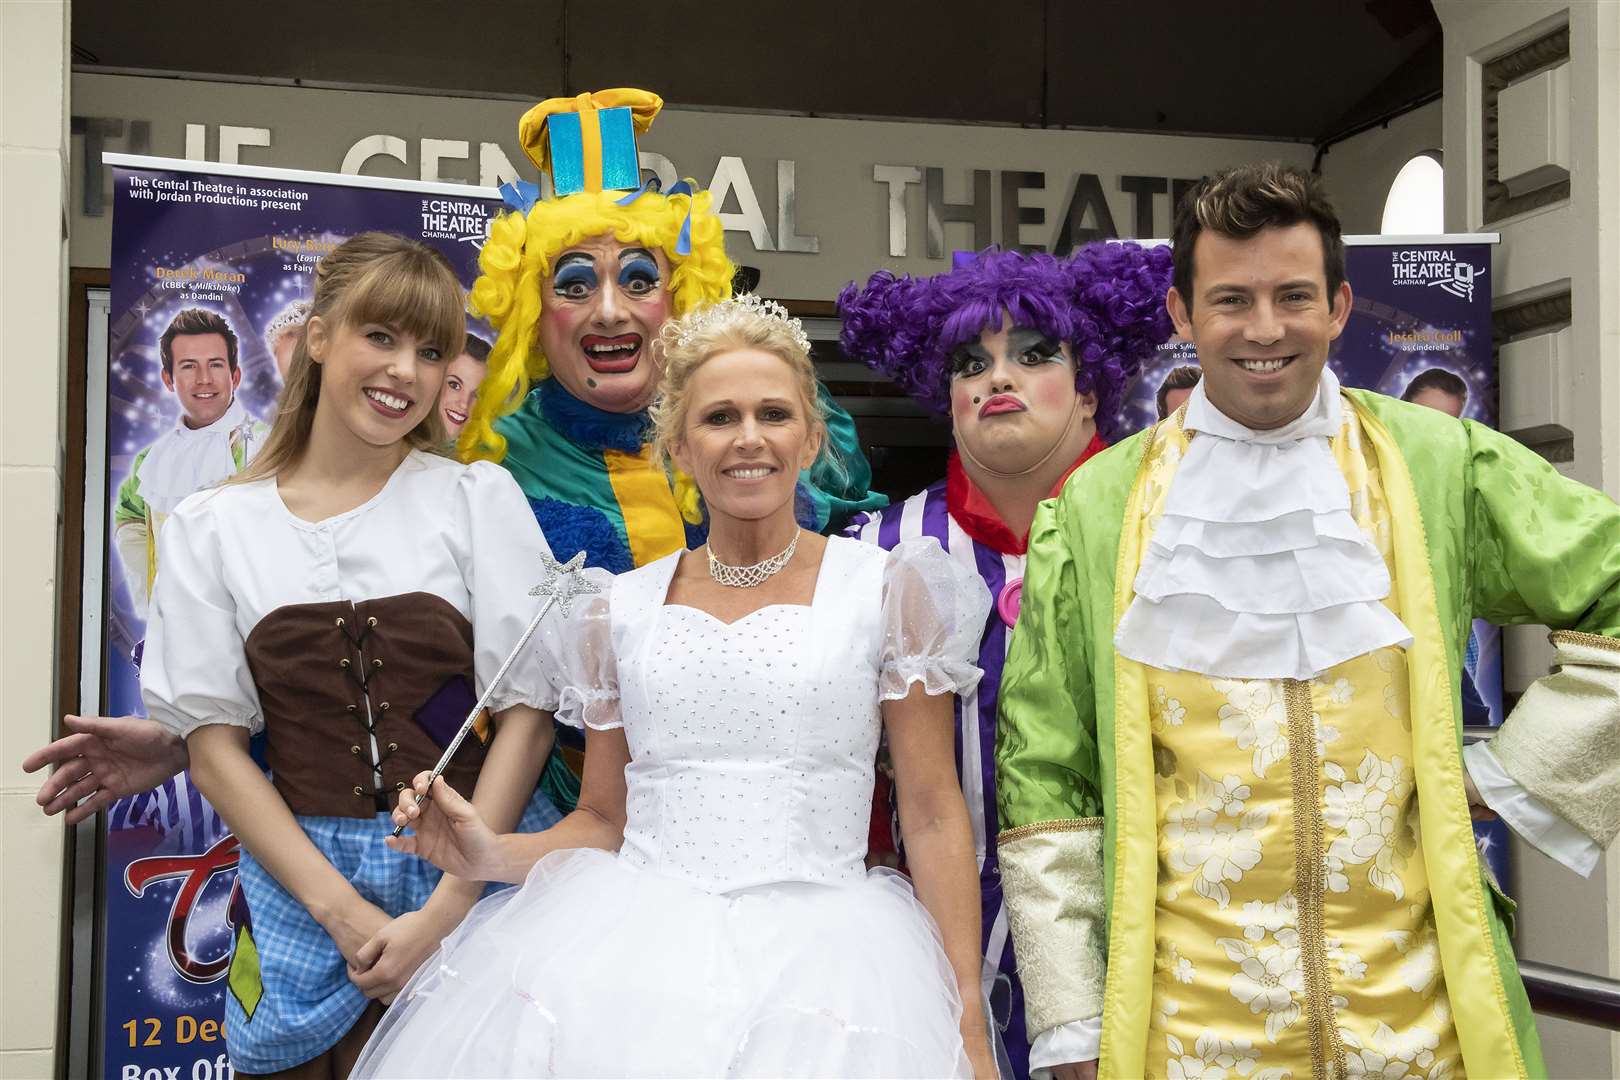 The cast of Cinderella at Chatham's Central Theatre